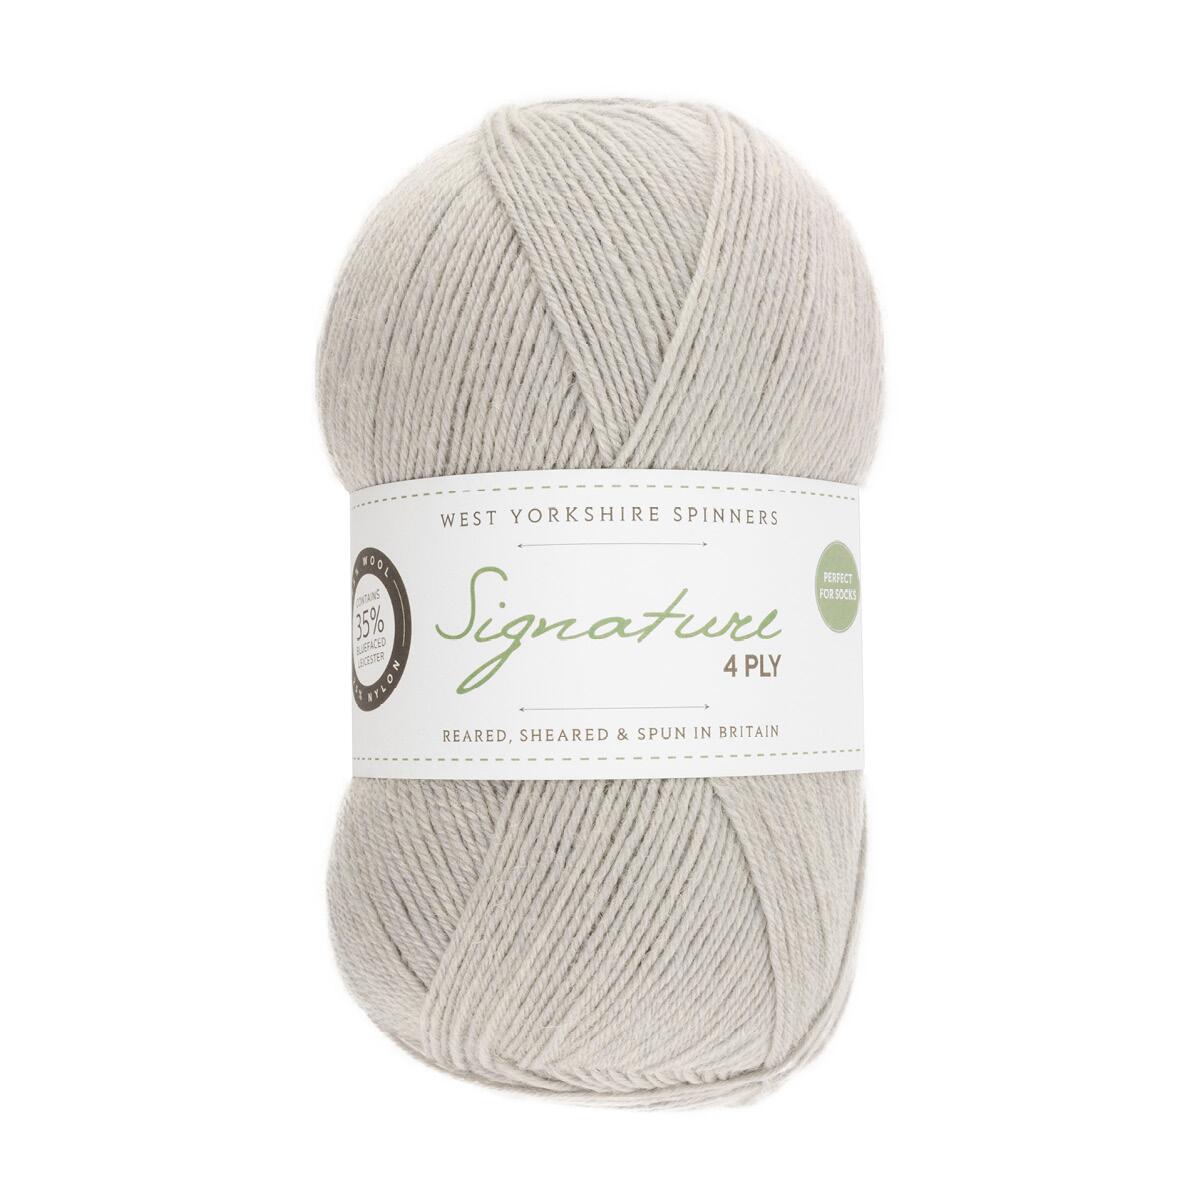 West Yorkshire Spinners Signature 4ply Unis 100g Farbe: 129 Dusty Miller